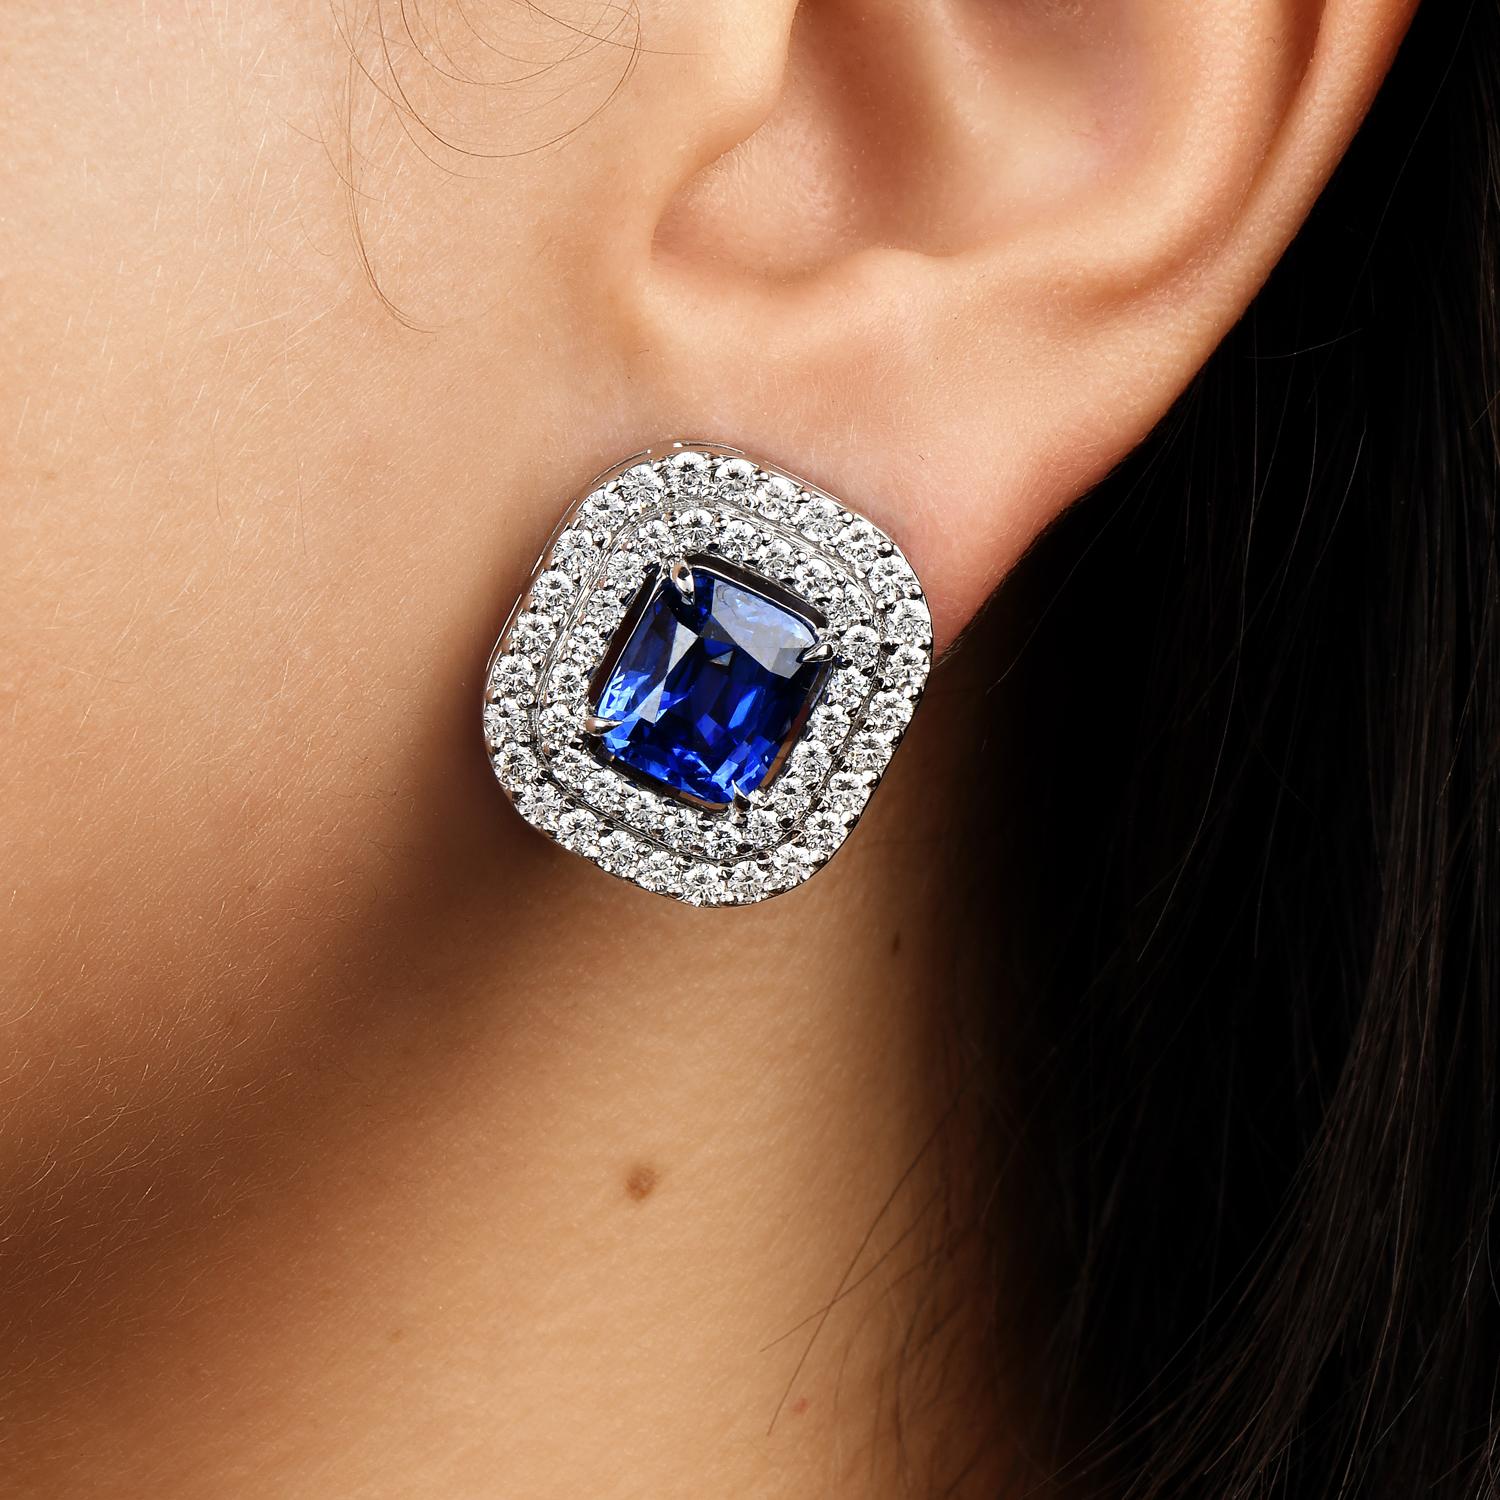 Royalty Blue in lovely double halo style elegant earrings.

They are crafted in solid 18K White Gold.

Each center has a Blue Sapphire, Cushion Cut, Heated,  prong Set, weighing collectively approx: 8.69 carats.

The double halo has